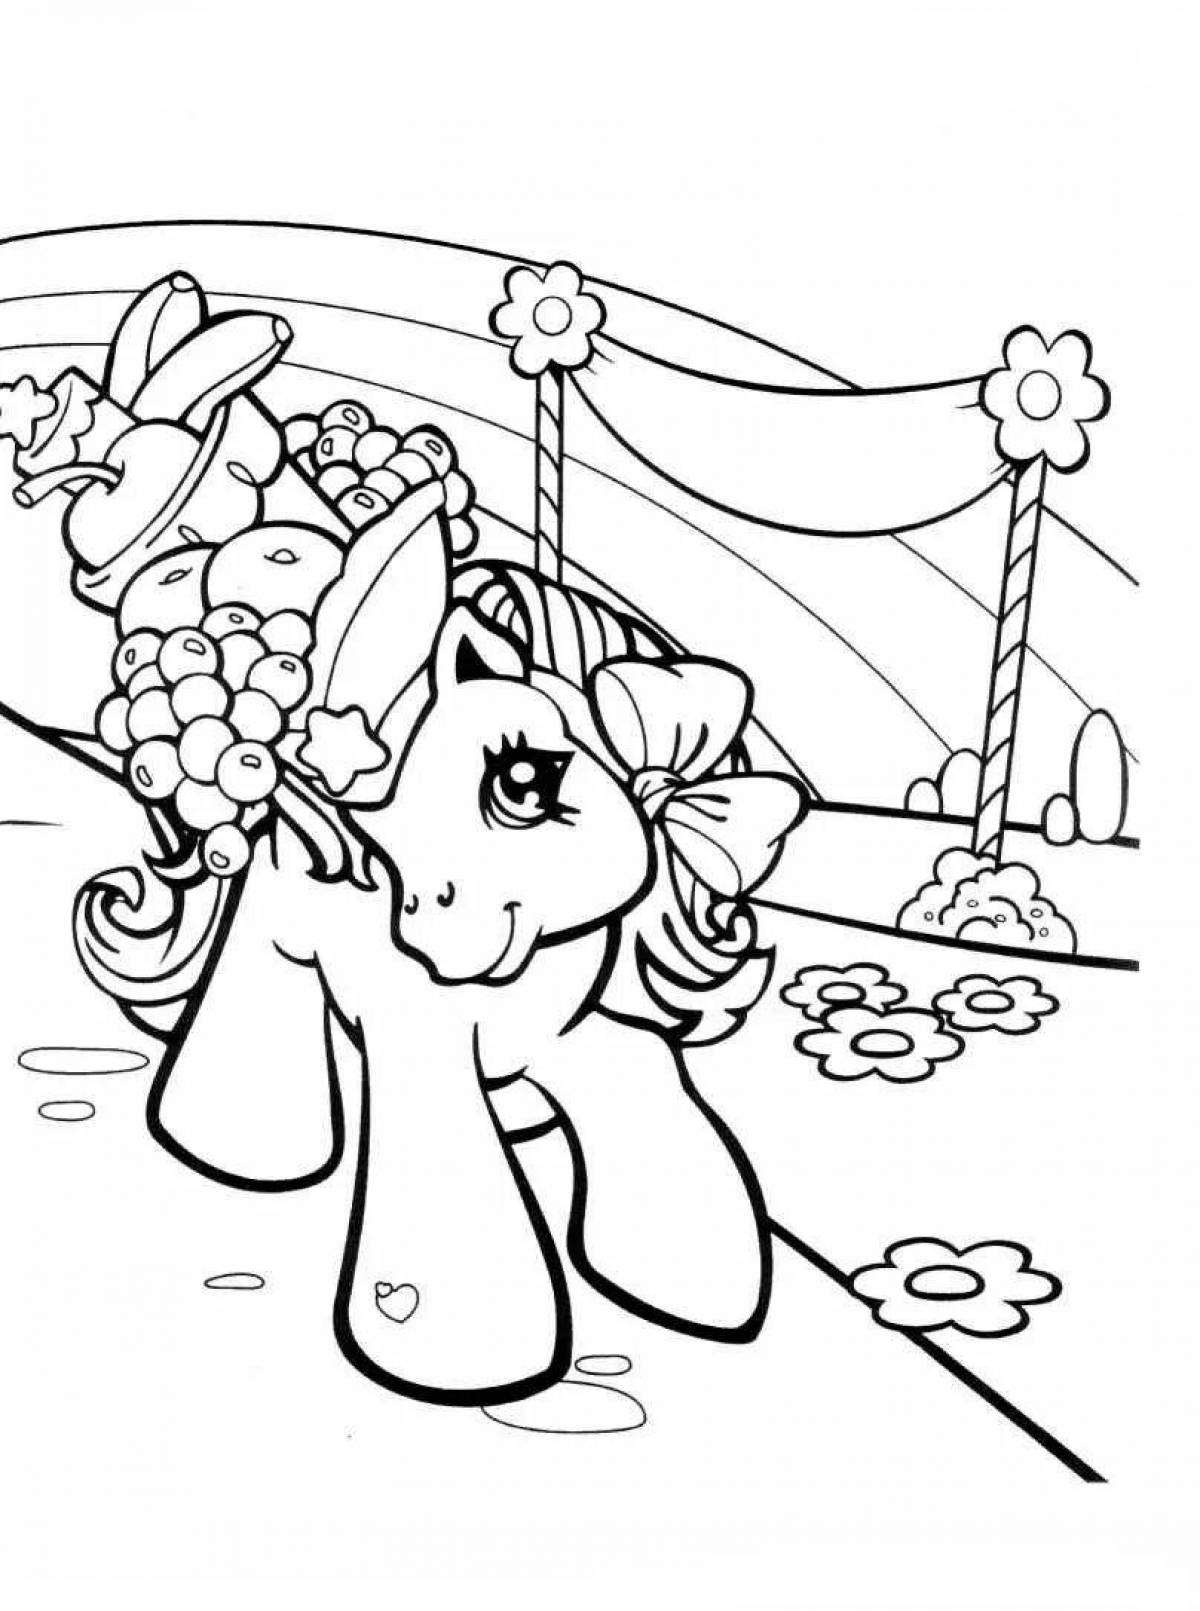 Glitter horse coloring pages